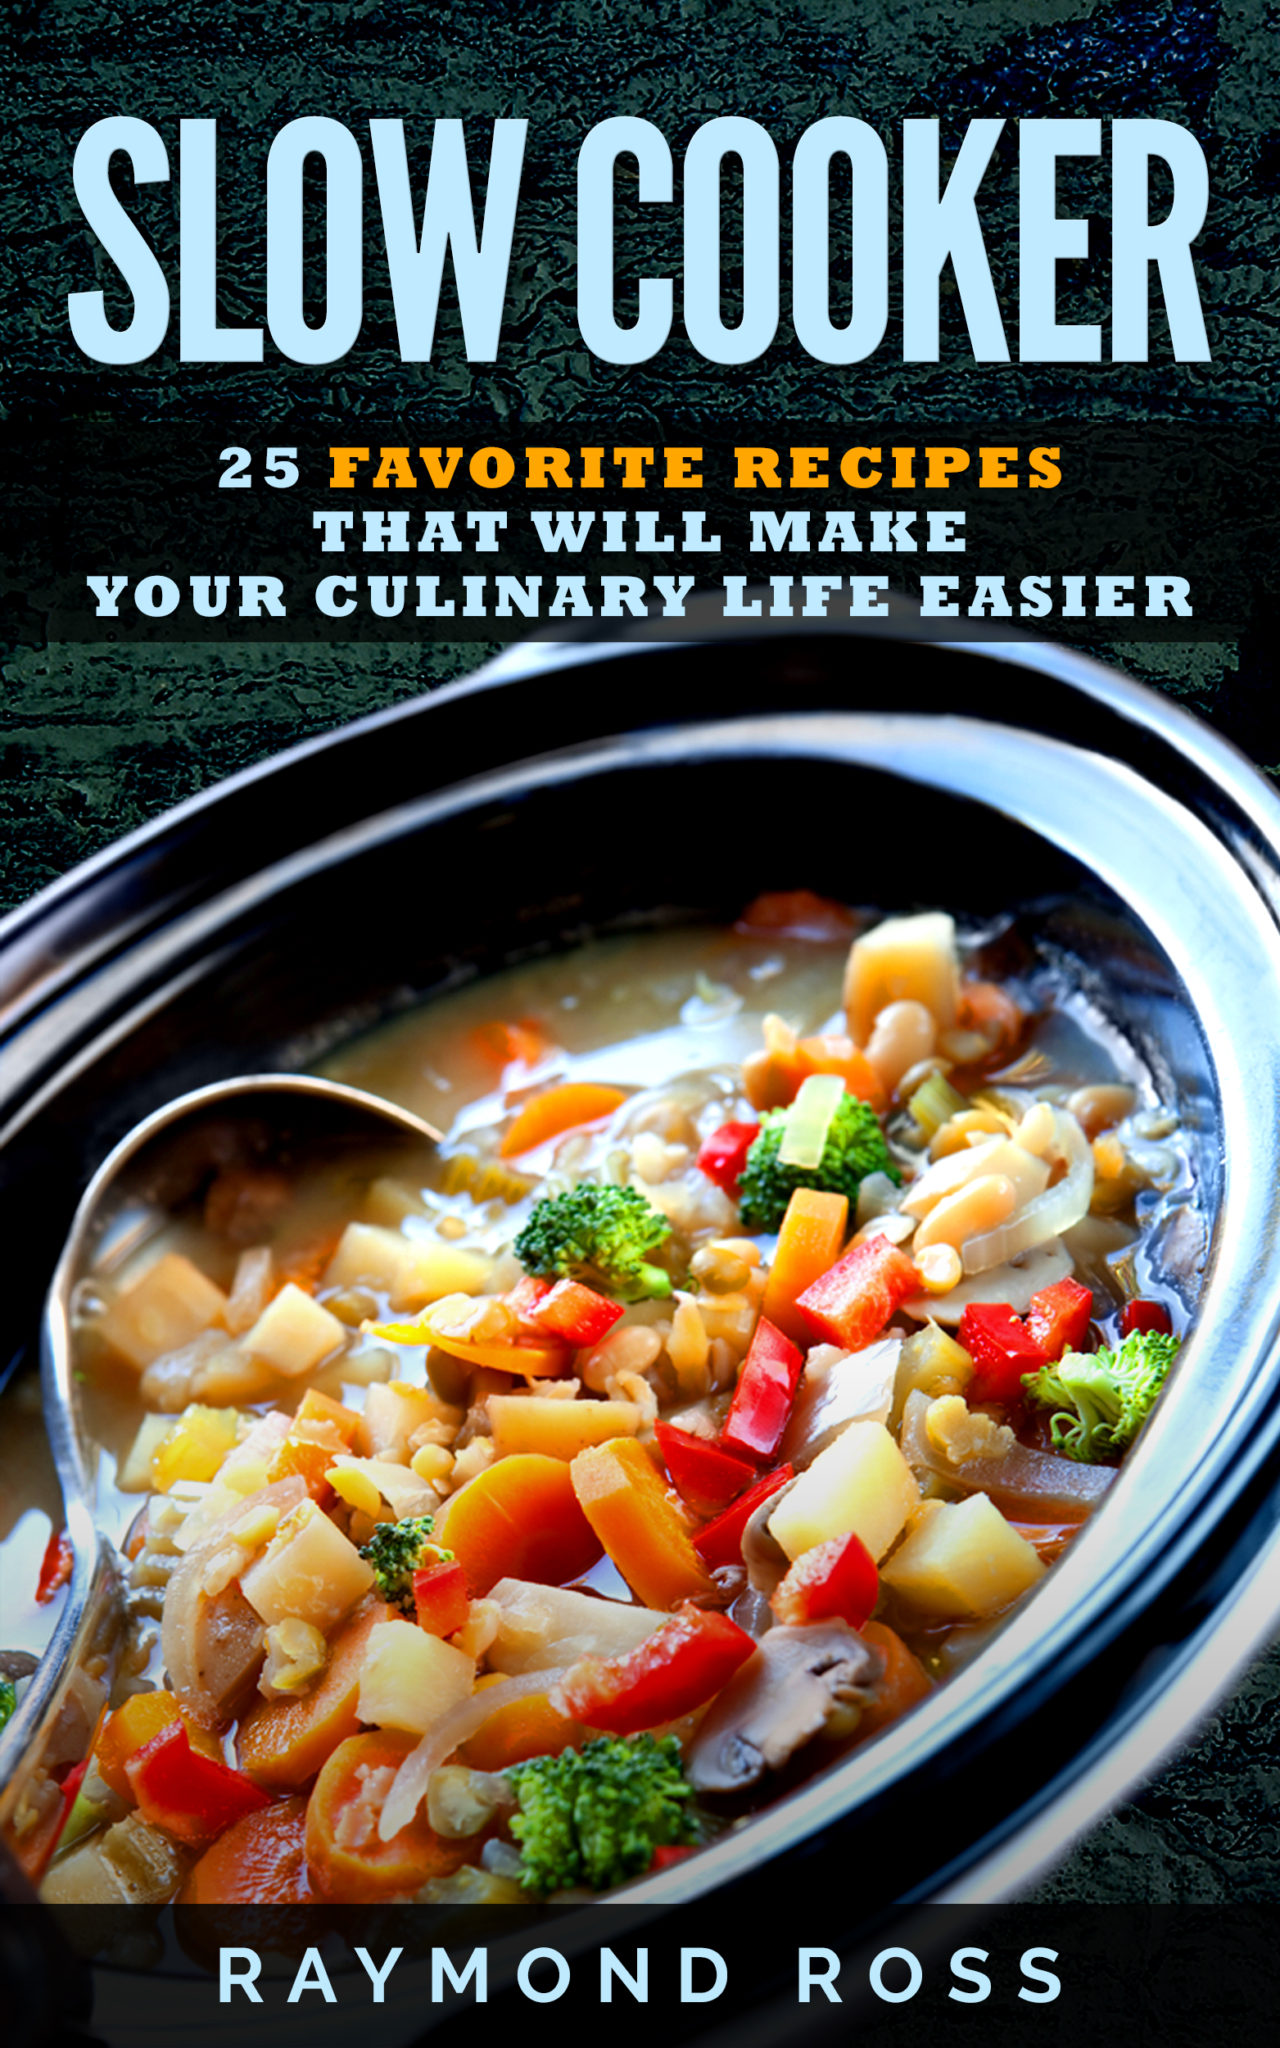 FREE: Slow Cooker: 25 Favorite Recipes That Will Make Your Culinary Life Easier by Raymond Ross